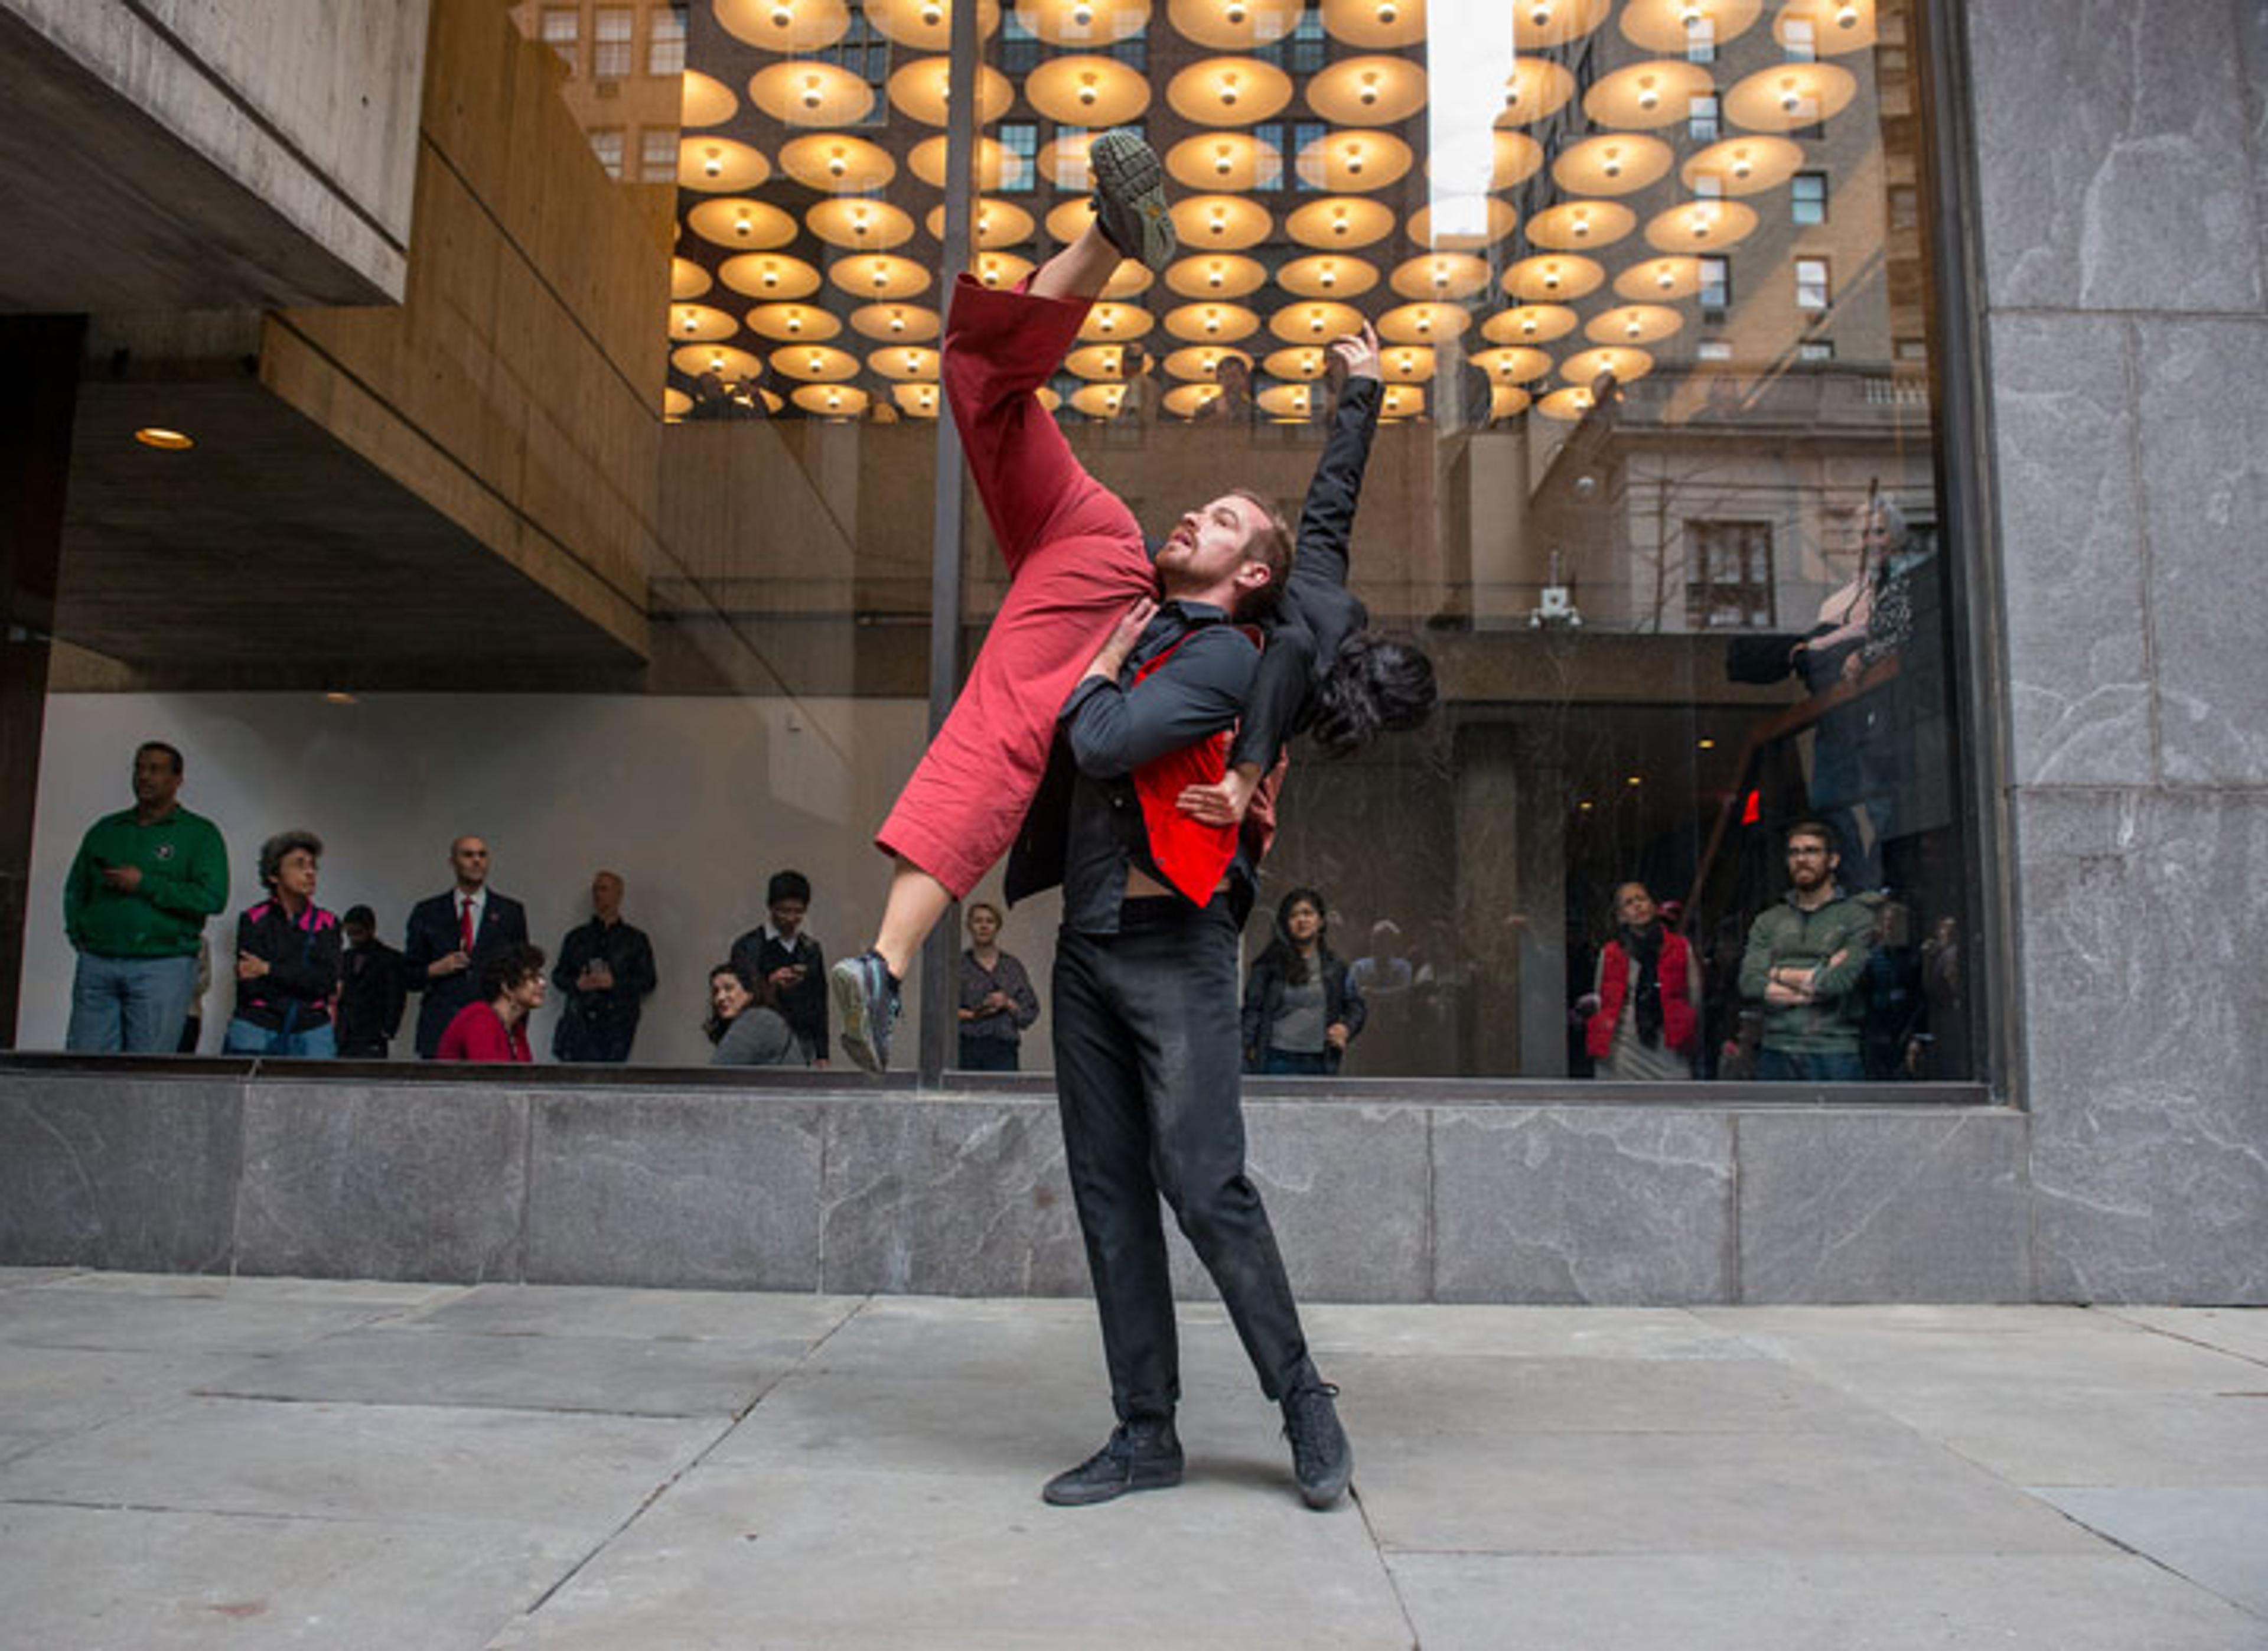 A male dancer supports a female dancer while performing in The Met Breuer's Sunken Garden